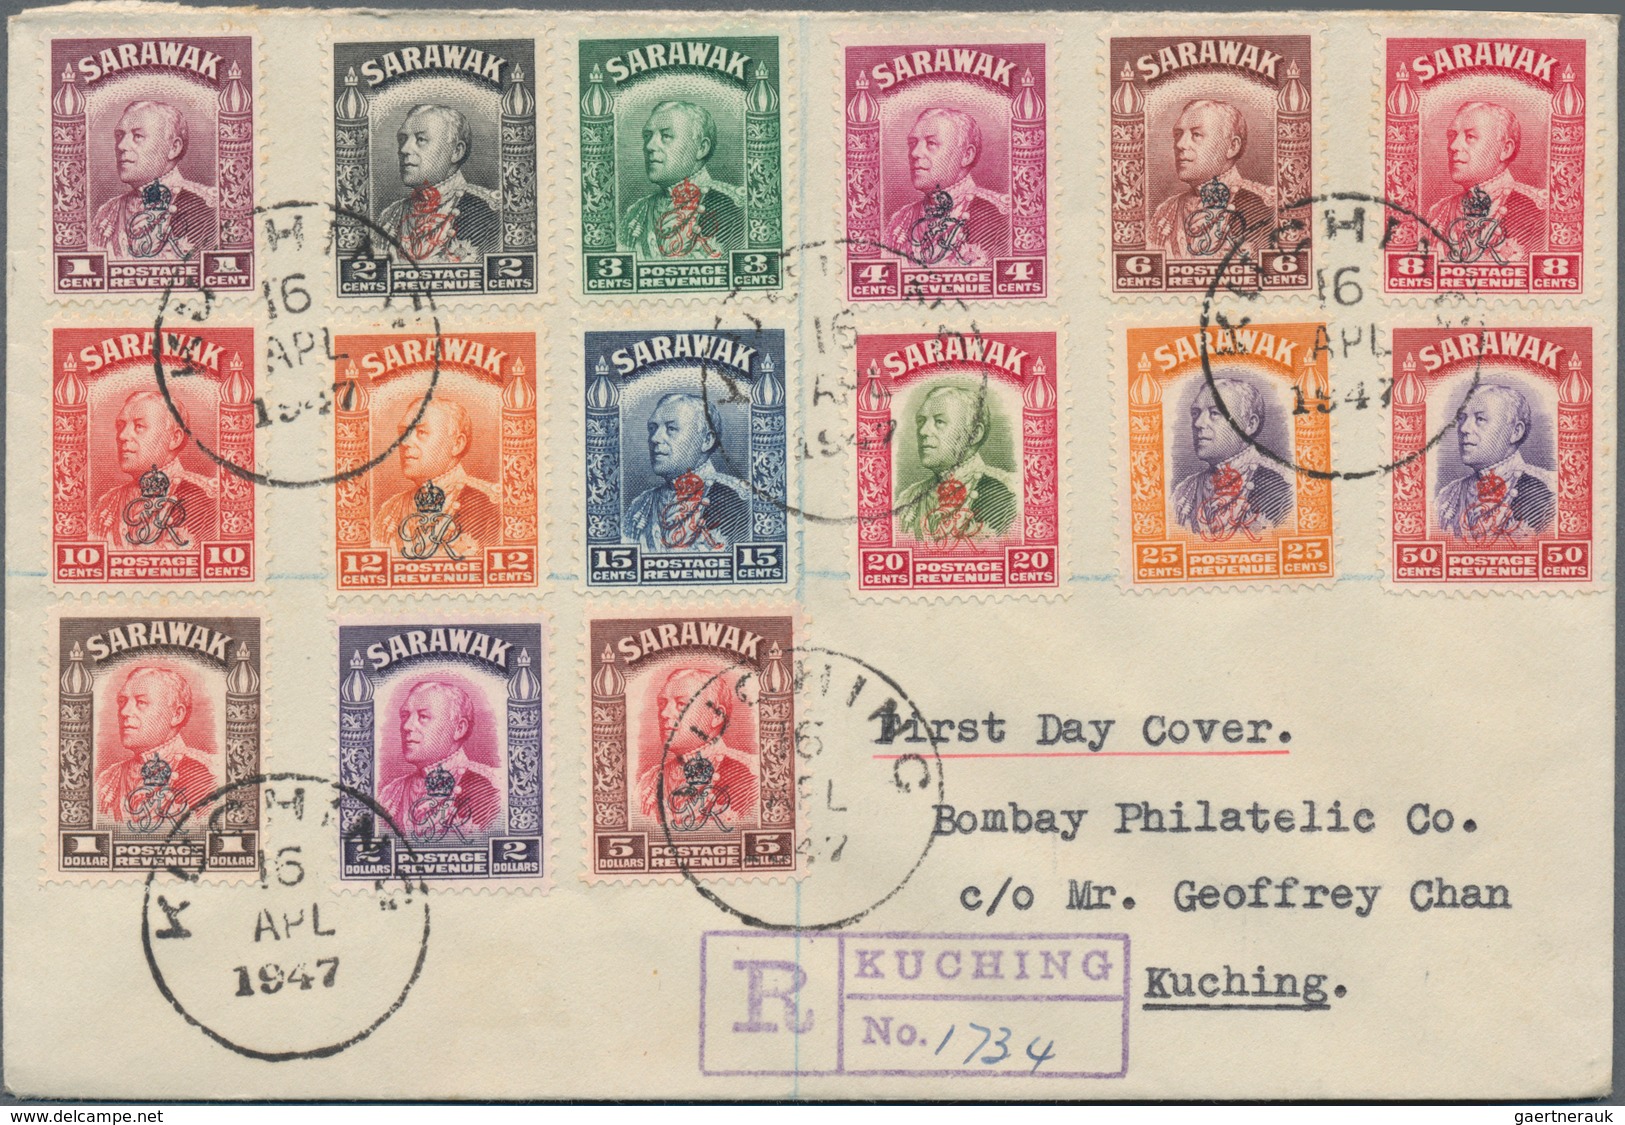 Malaiische Staaten - Sarawak: 1929/48, covers (5) mostly airmail to UK/USA, FDC 1947/53 (5) inc. 1 C